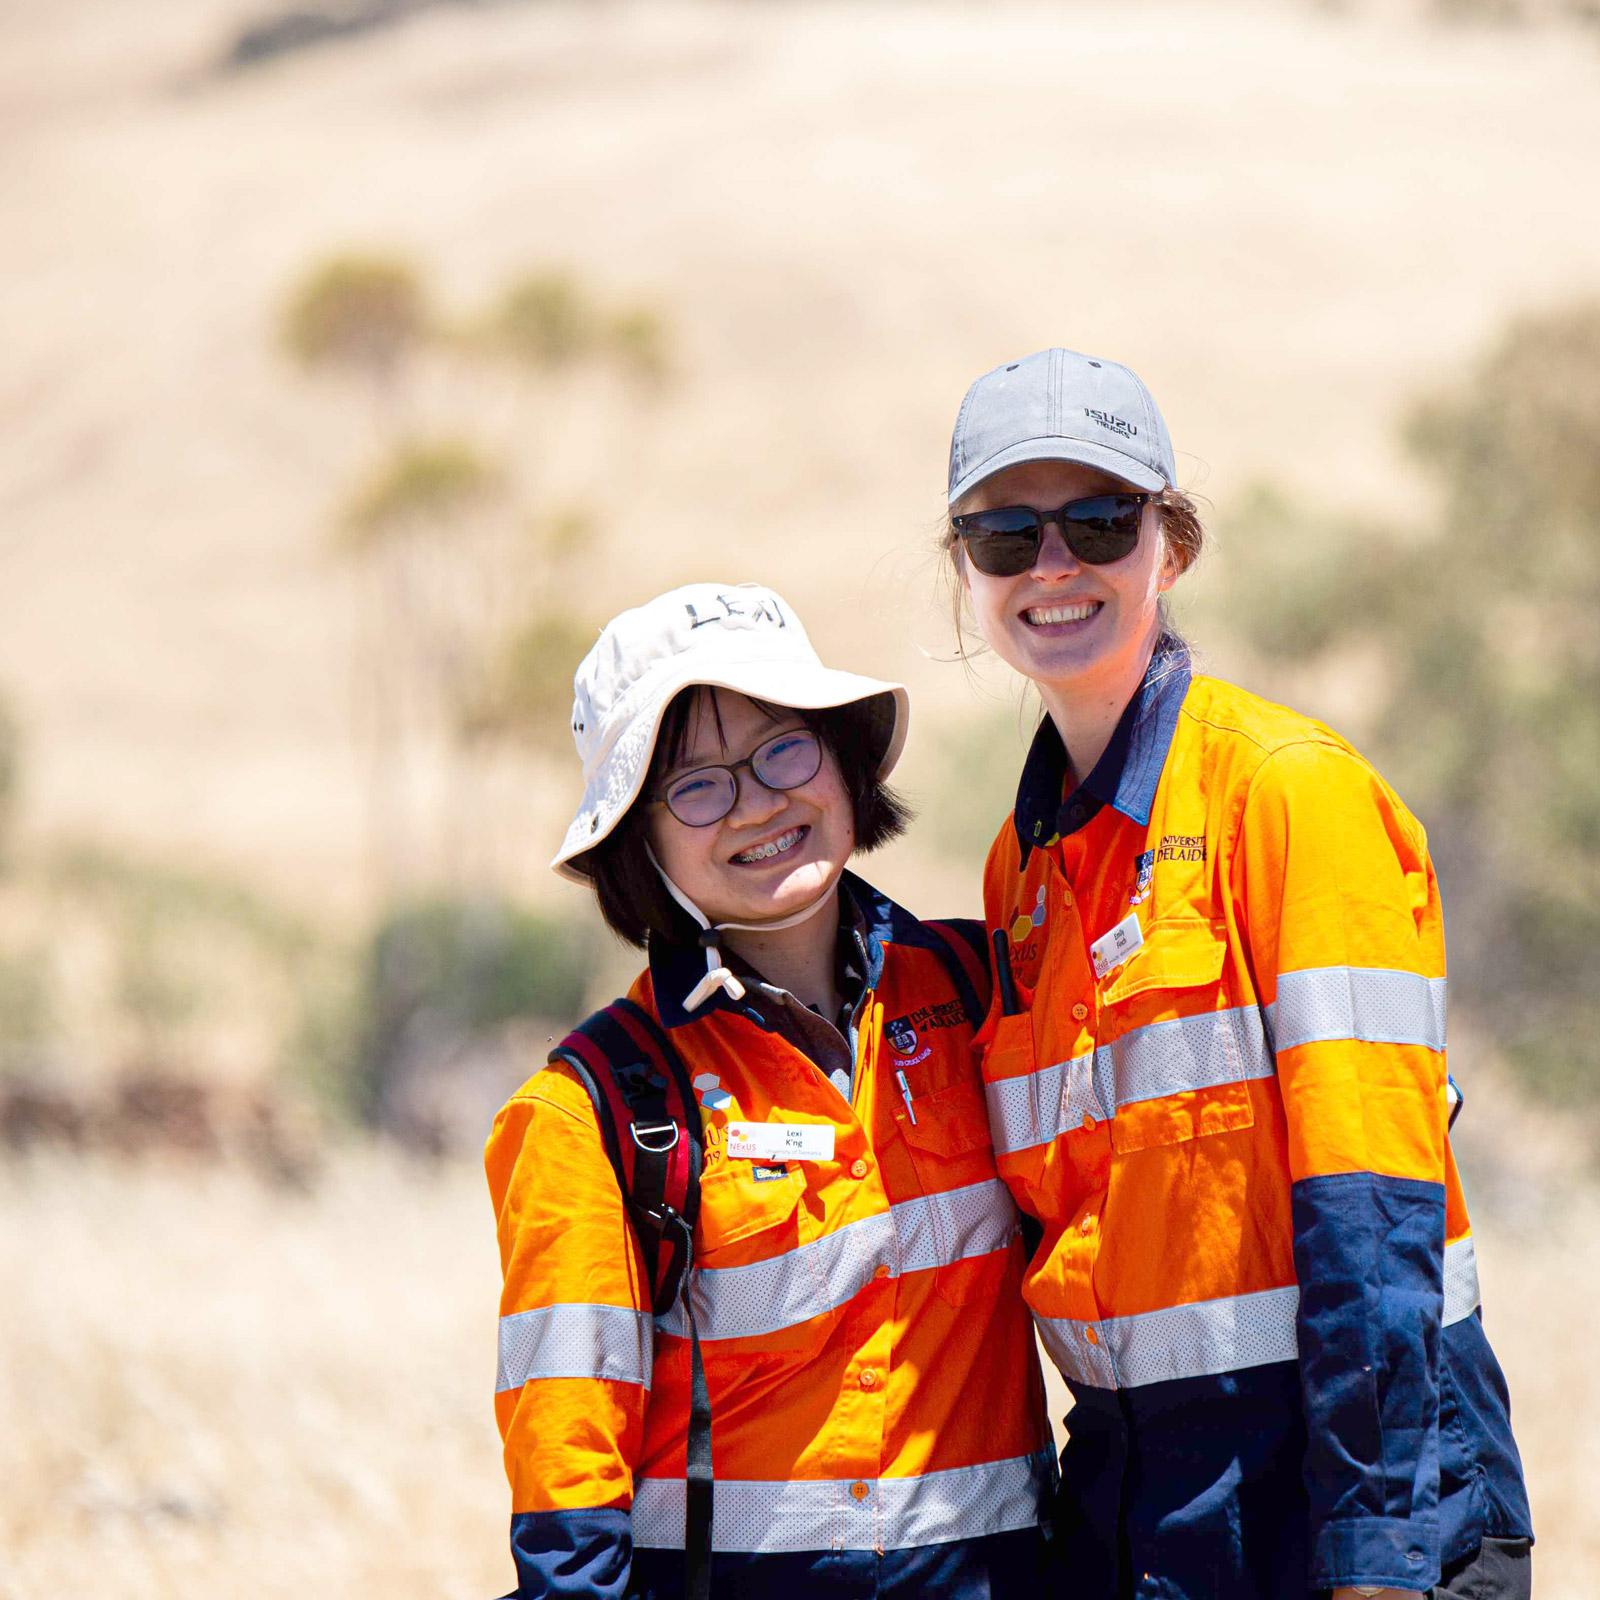 NExUS participants conducting field work in the Adelaide Hills